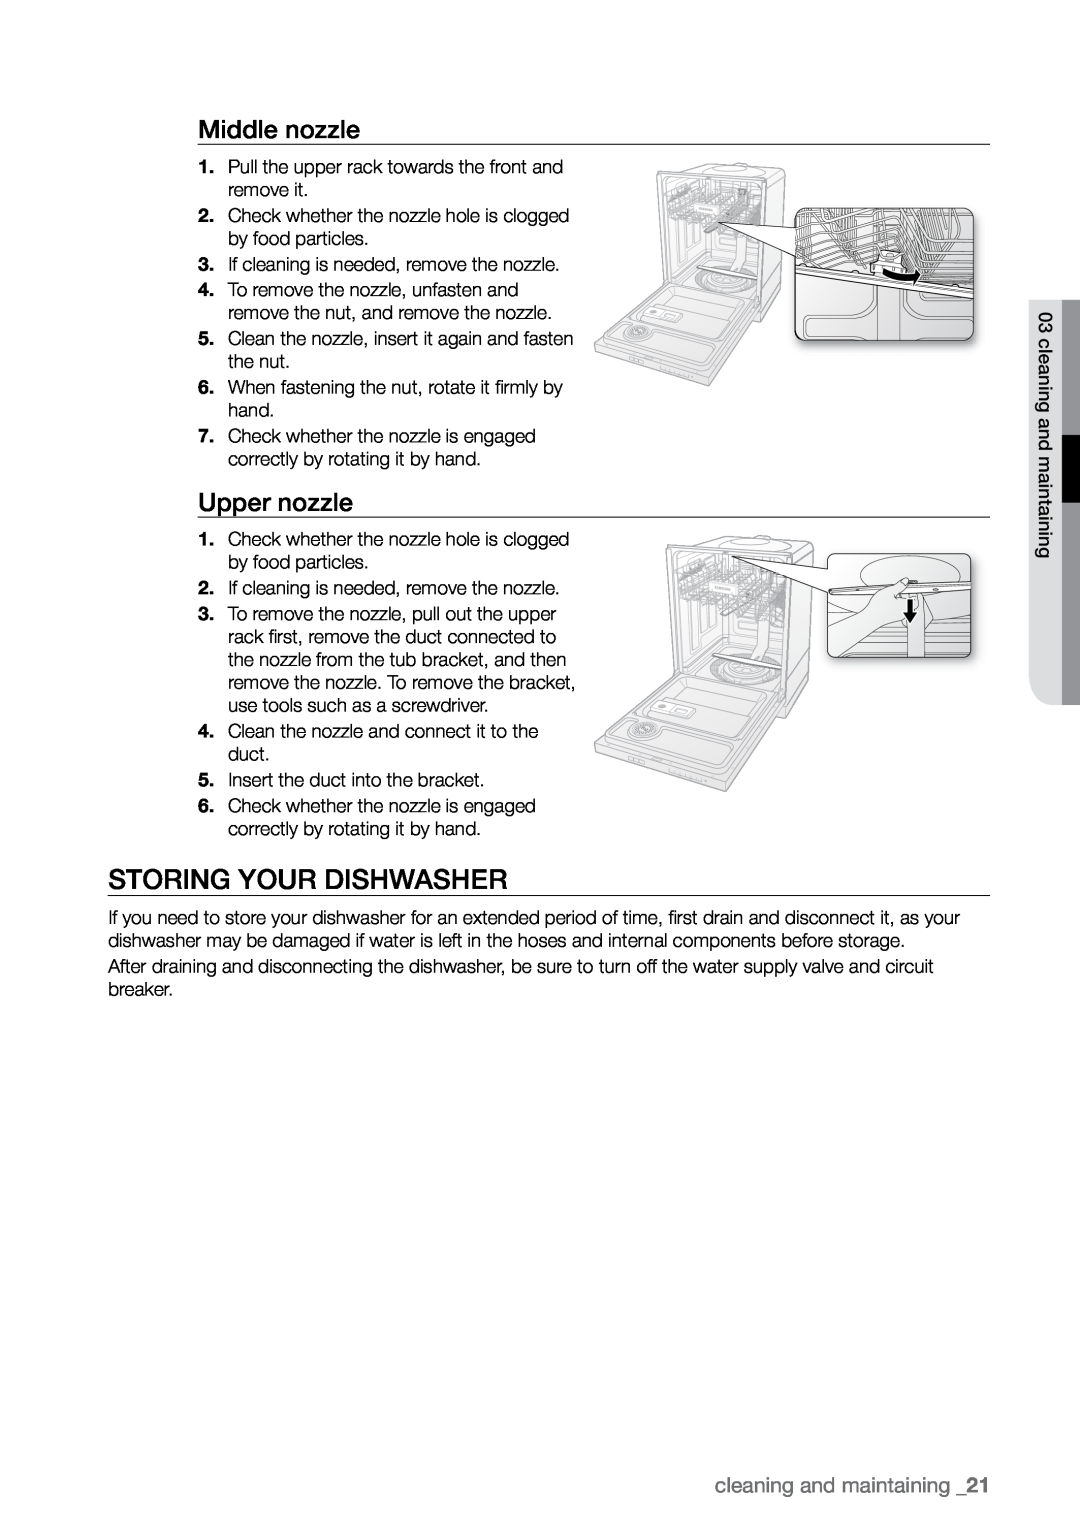 Samsung DMR78 manual Storing your dishwasher, Middle nozzle, Upper nozzle, cleaning and maintaining 